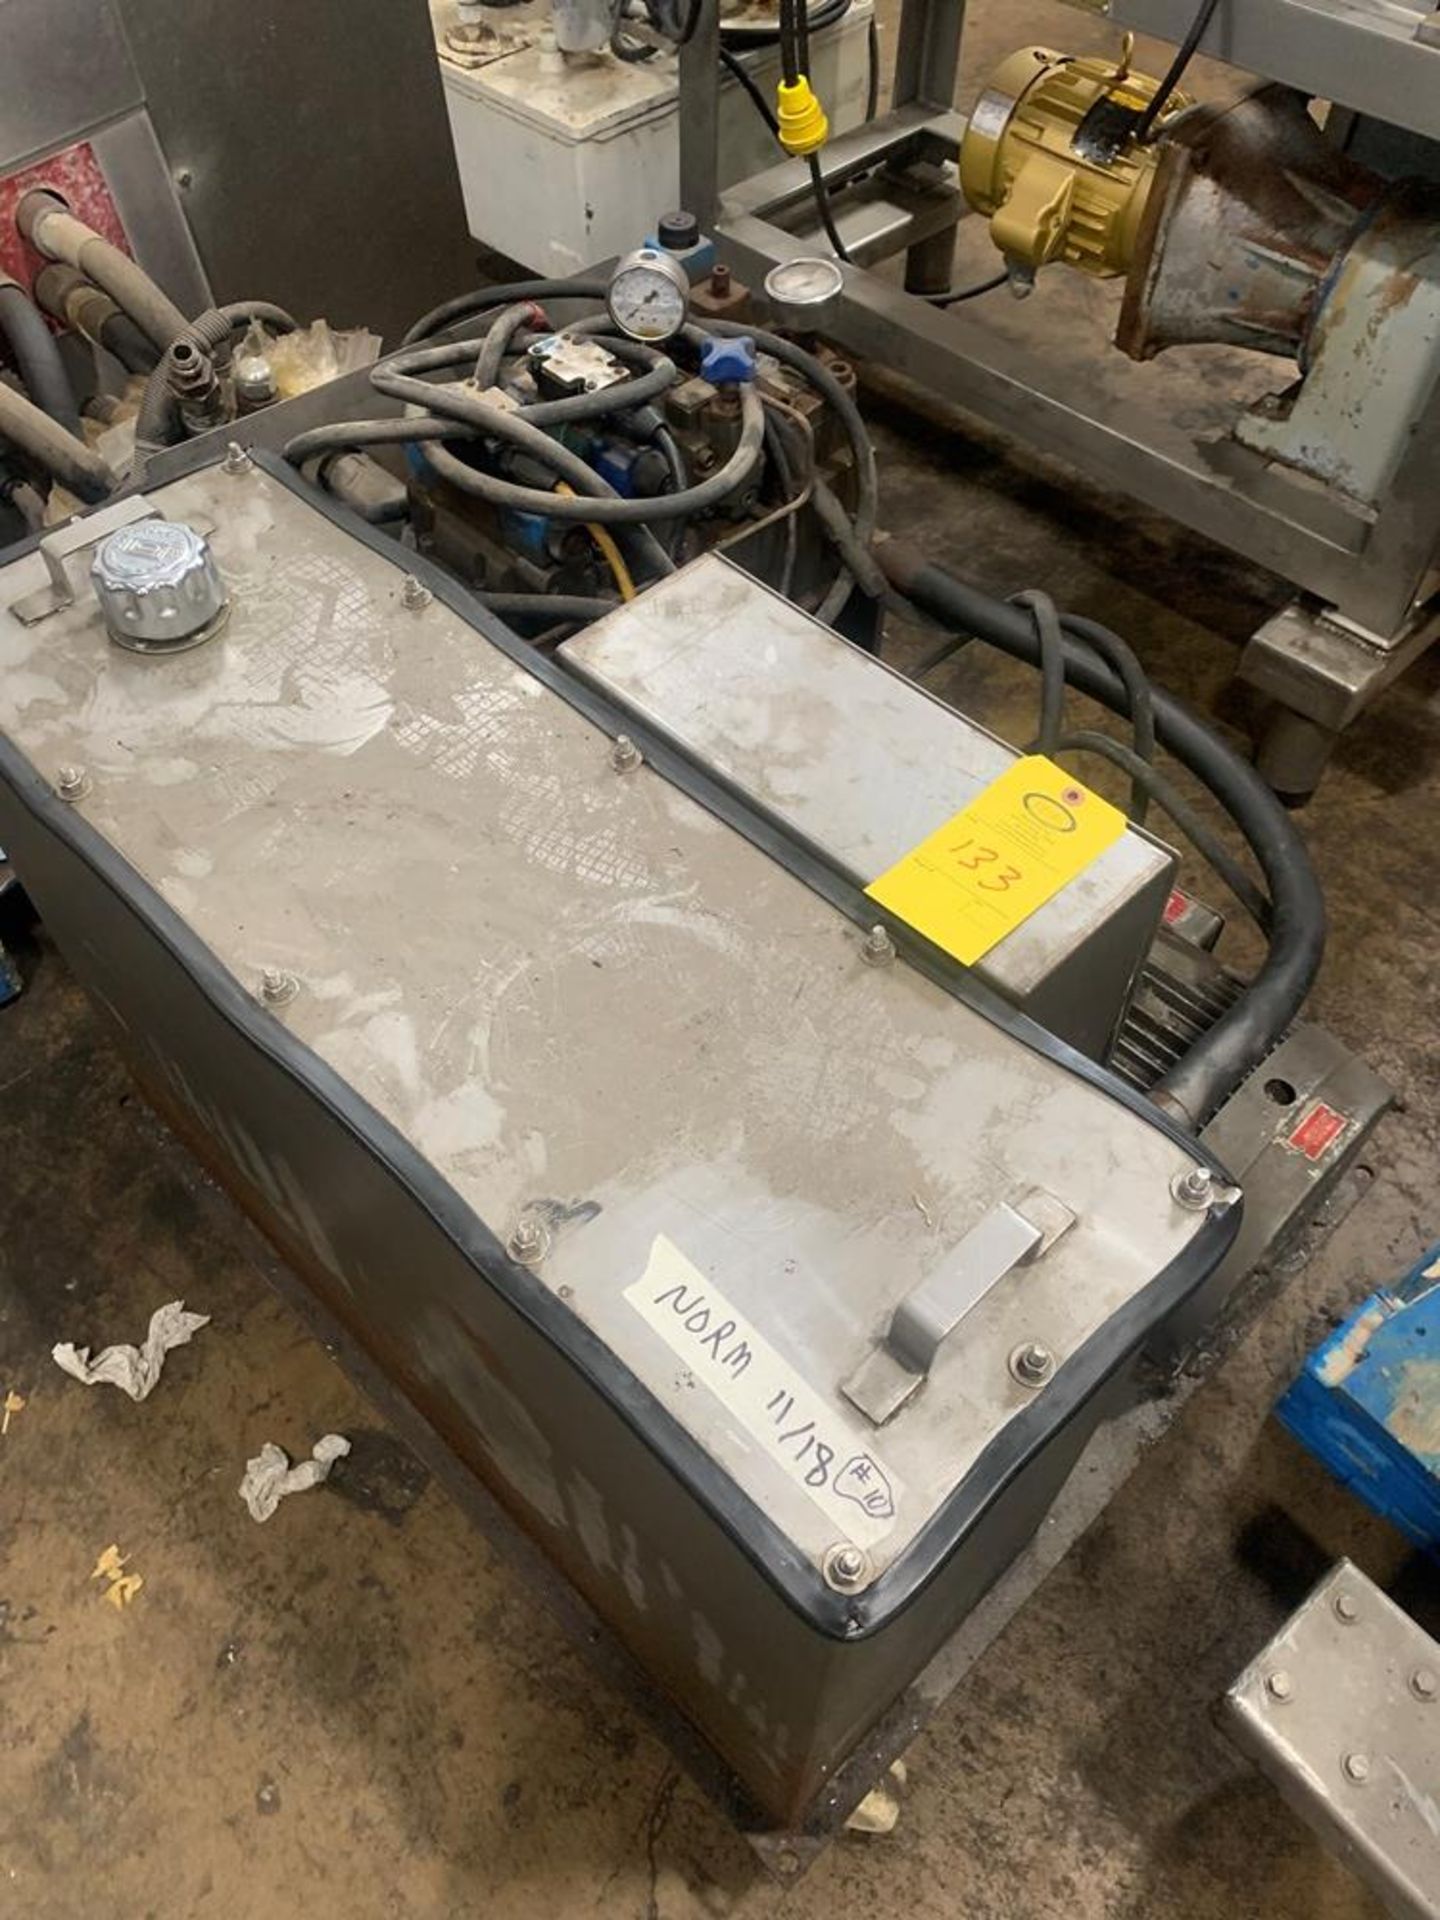 Bettcher Mdl. 75 Press with power pack for parts (Located in Plano, IL) - Image 9 of 11